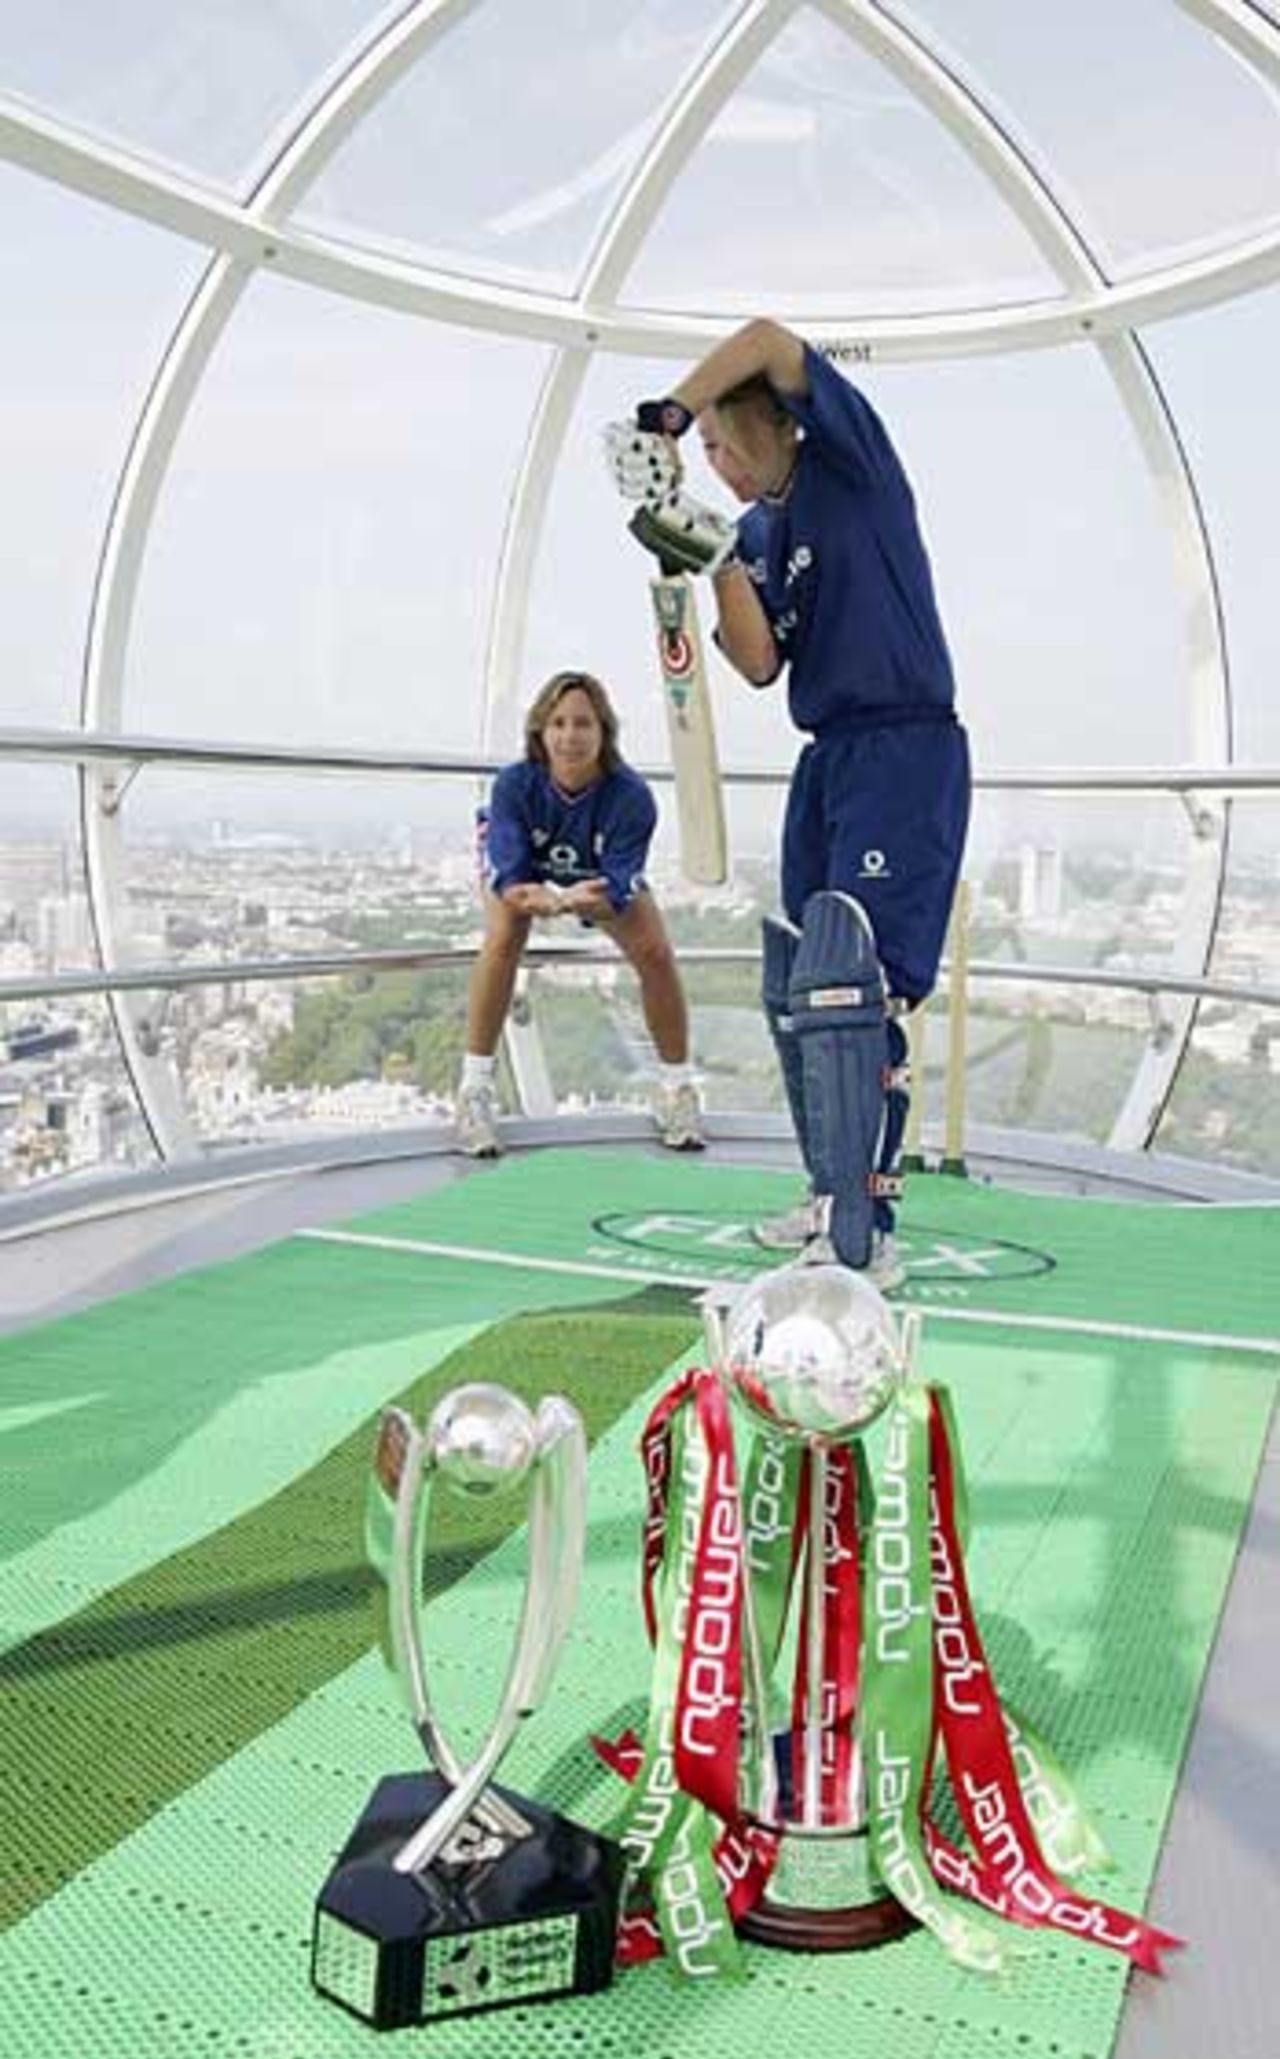 Clare Conner and Rosalie Birch in the London Eye to promote the England Women's Ashes seires, July 18